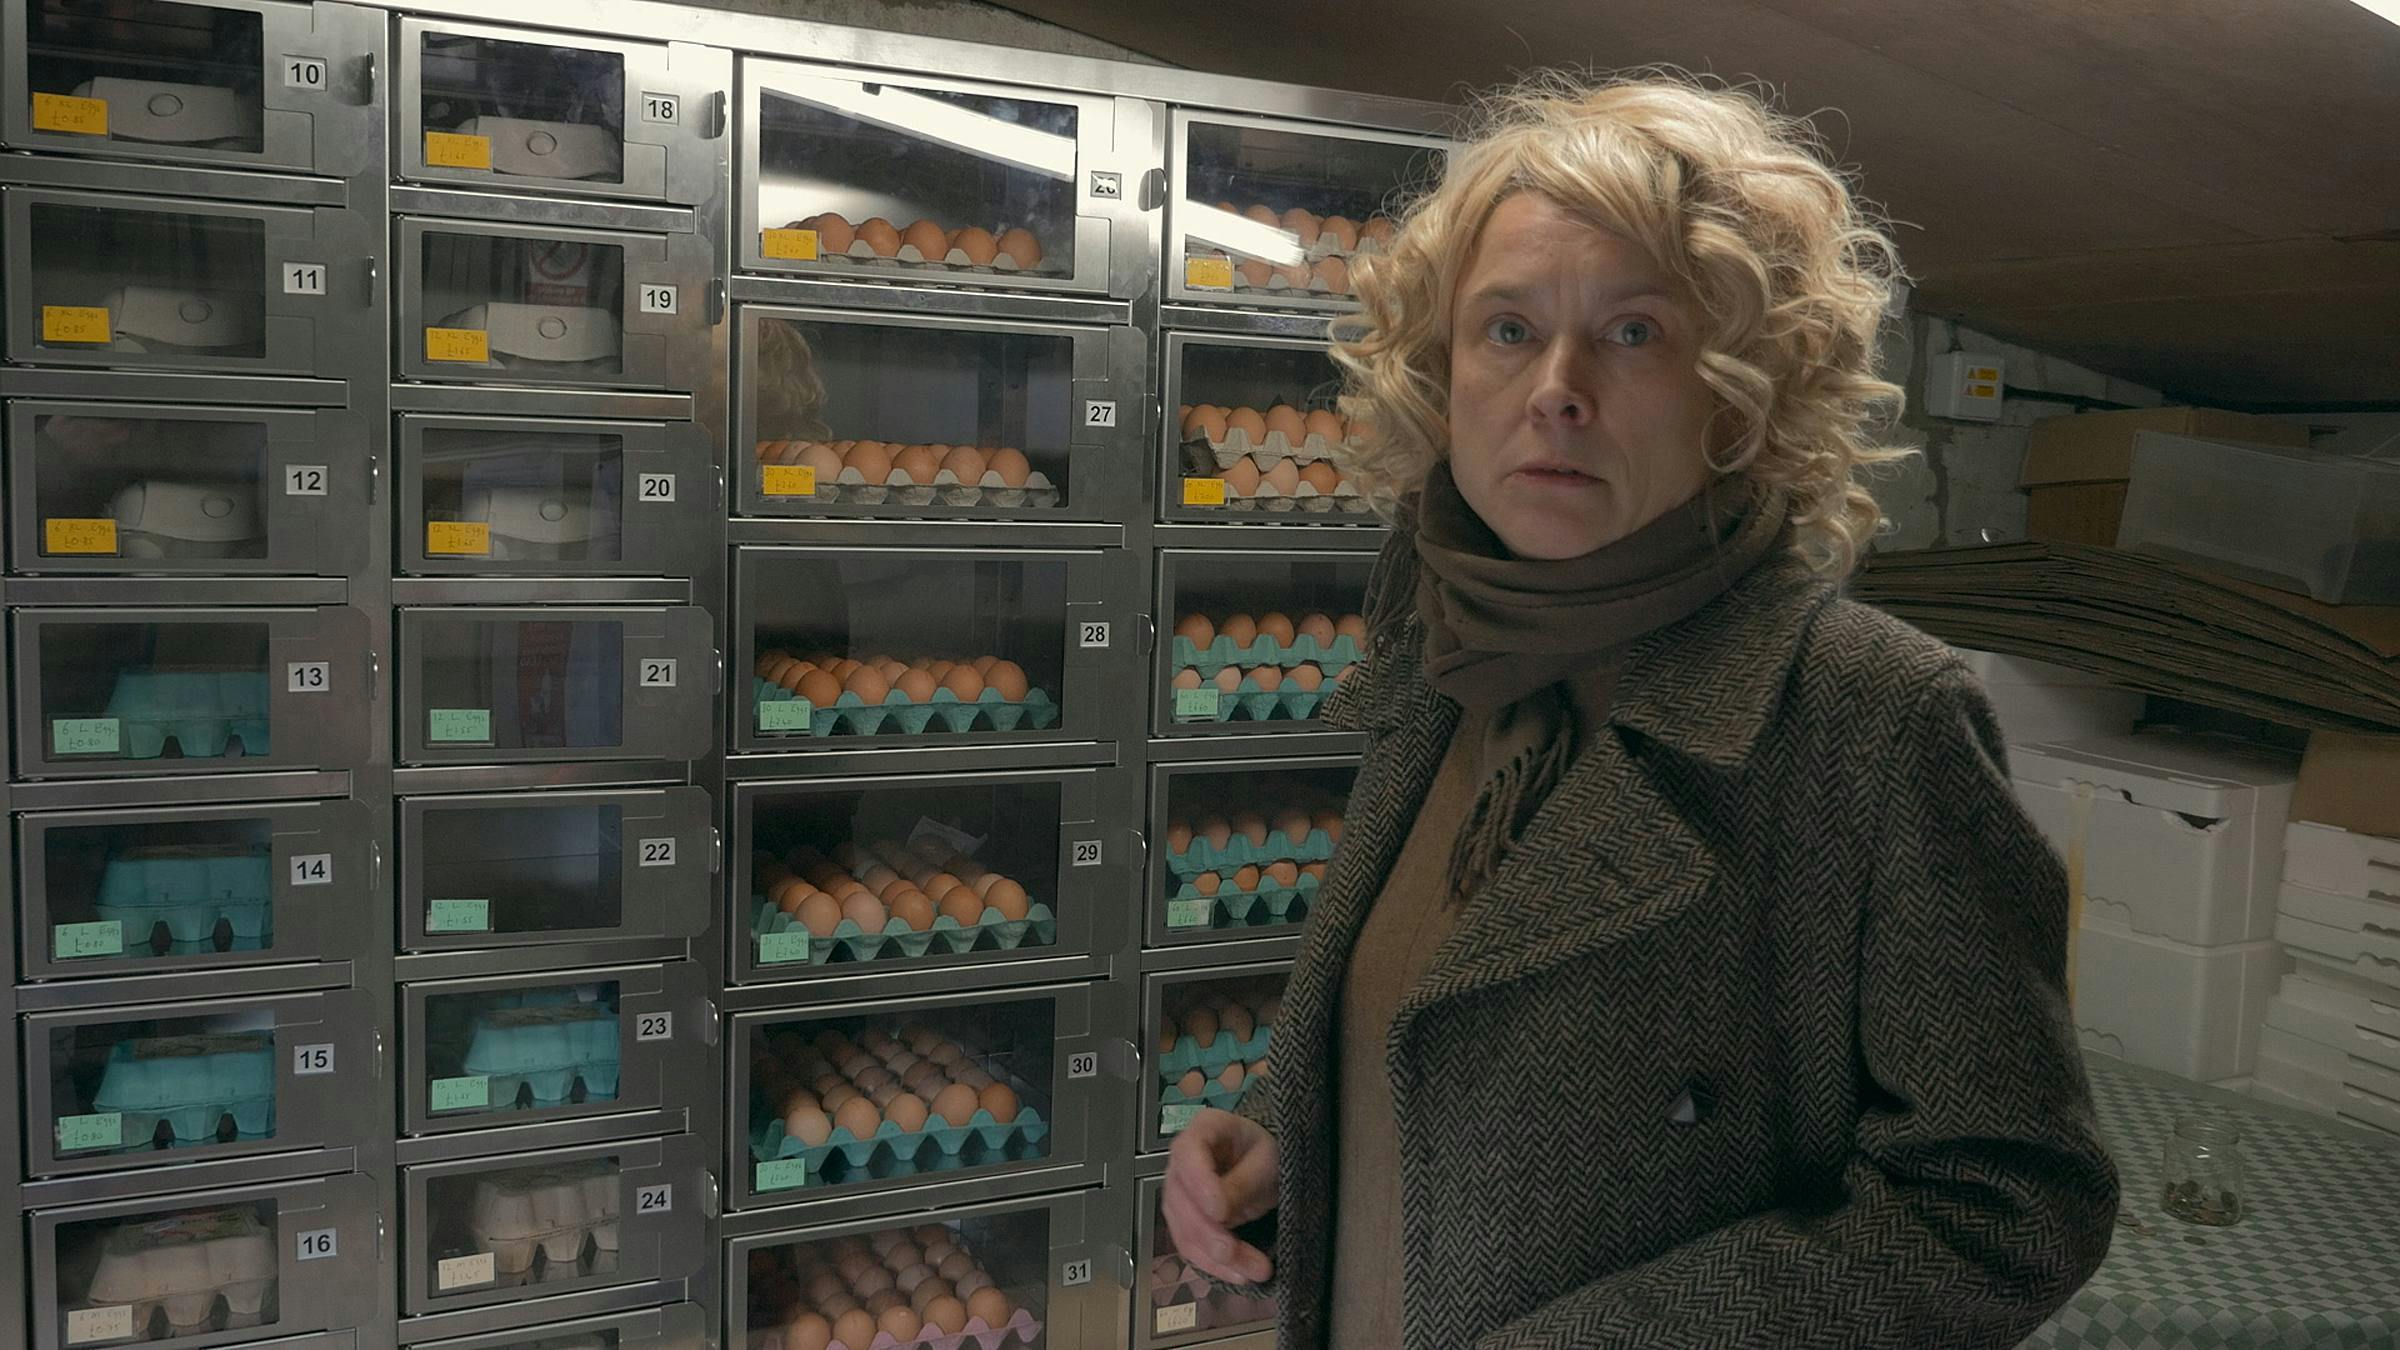 Blond curly haired person stands in the foreground wearing a brown coat. Behind them is a metal case holding eggs in egg trays.